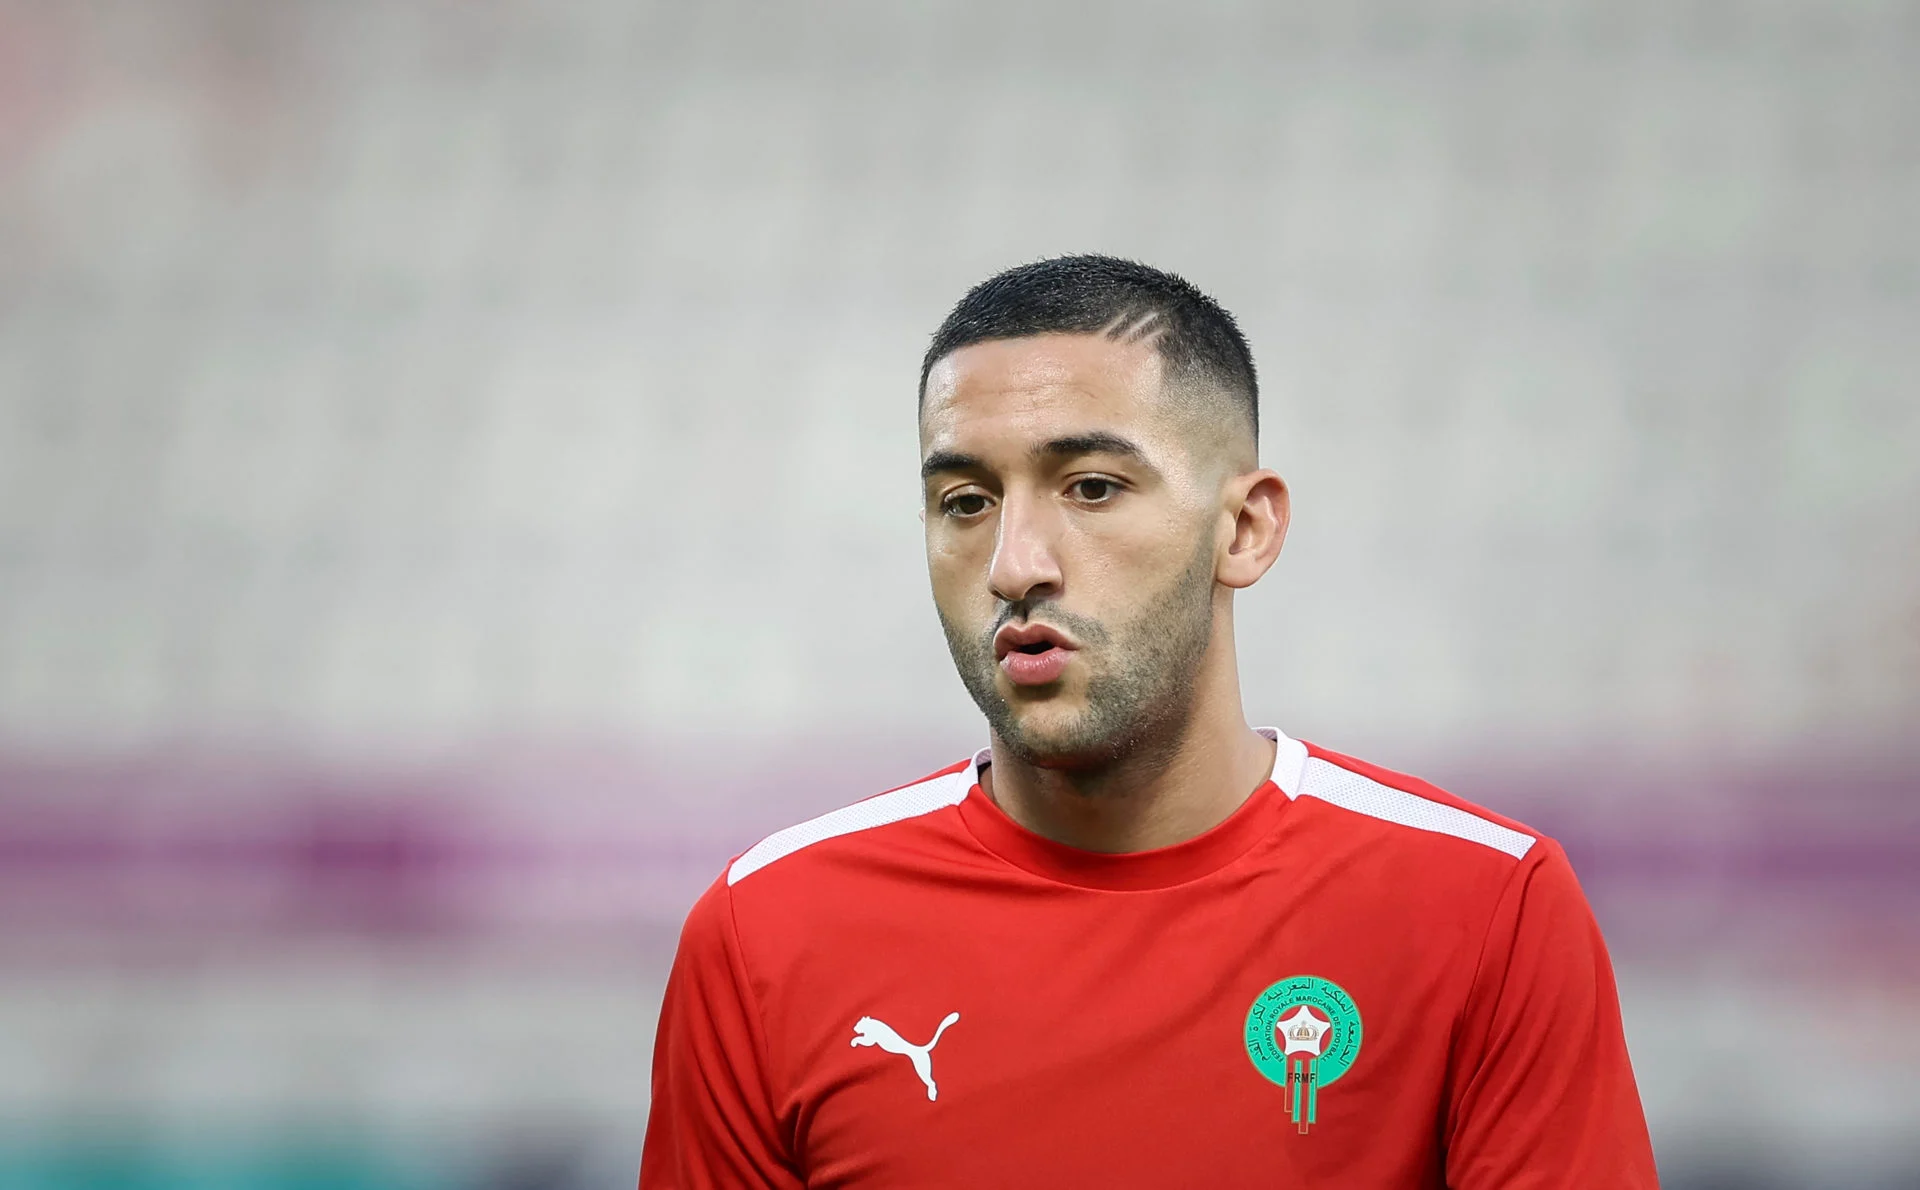 Milan are concocting their initial bid onboard Hakim Ziyech in January. They tried last summer, but they couldn’t come to terms with him and Chelsea.